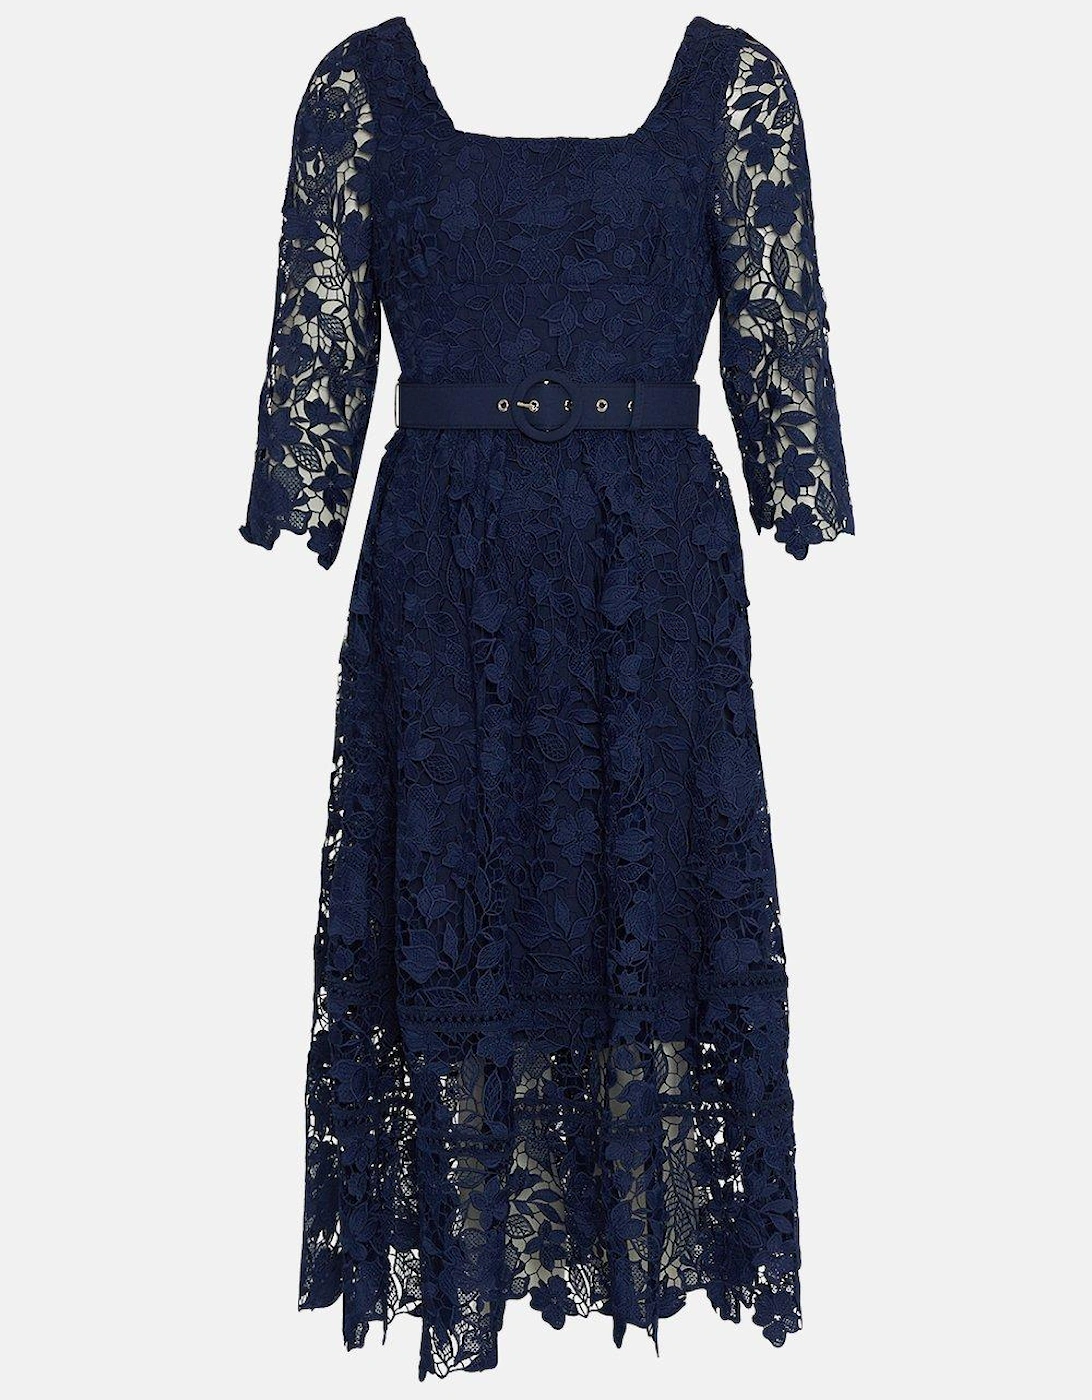 Square Neck Lace Dress With 3/4 Sleeve